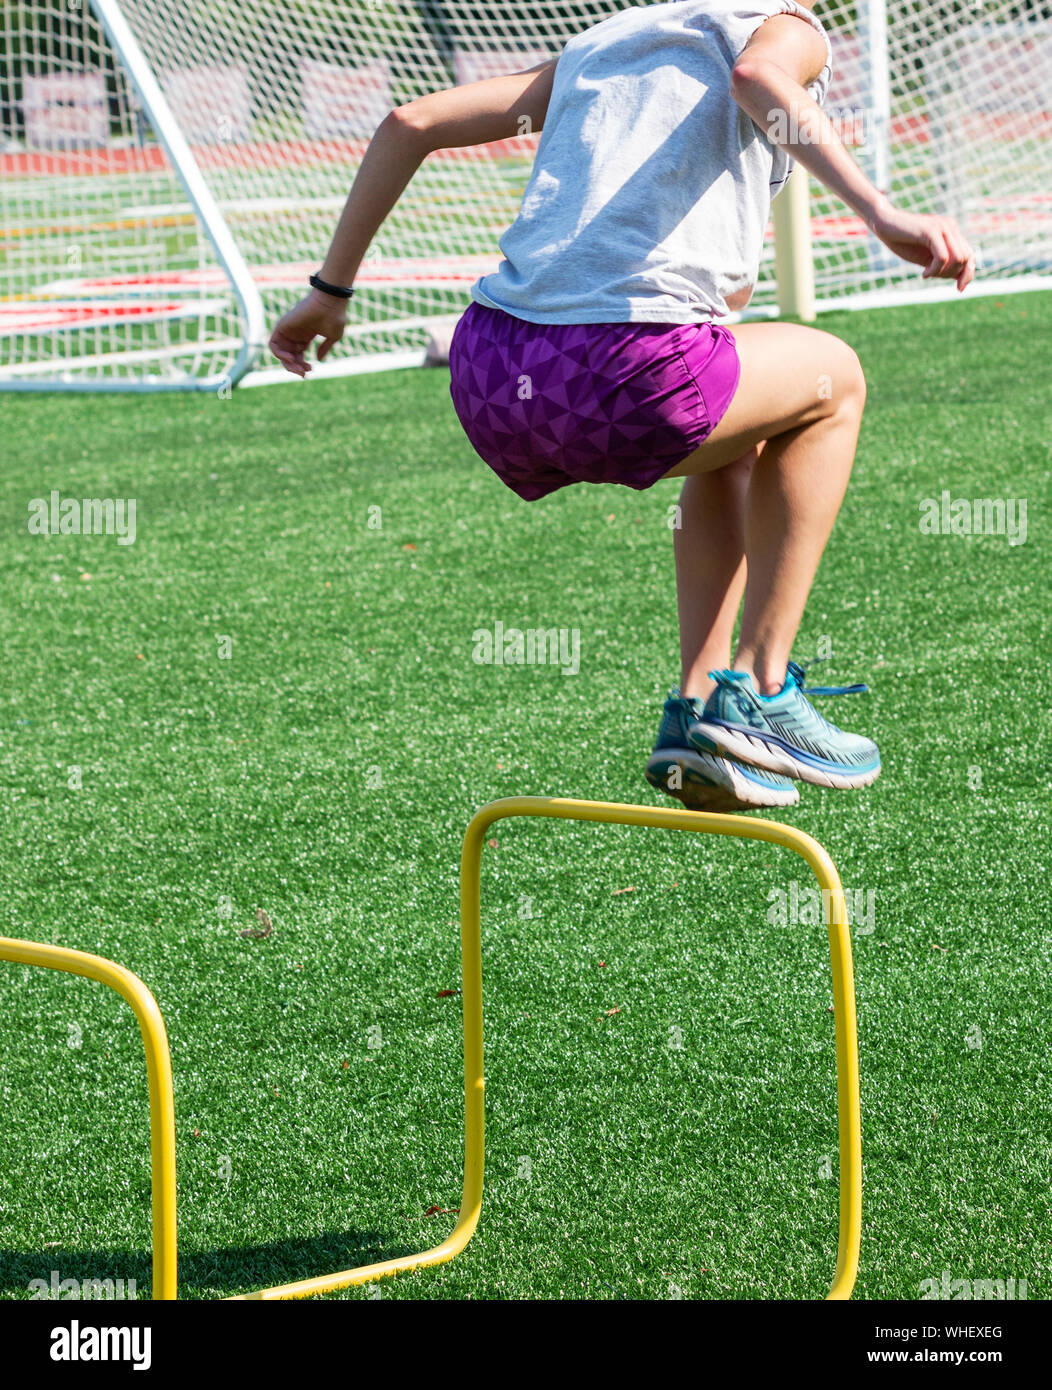 A high school runner wearing purple shorts is jumping over two foot yellow hurdles during strength and agility practice. Stock Photo